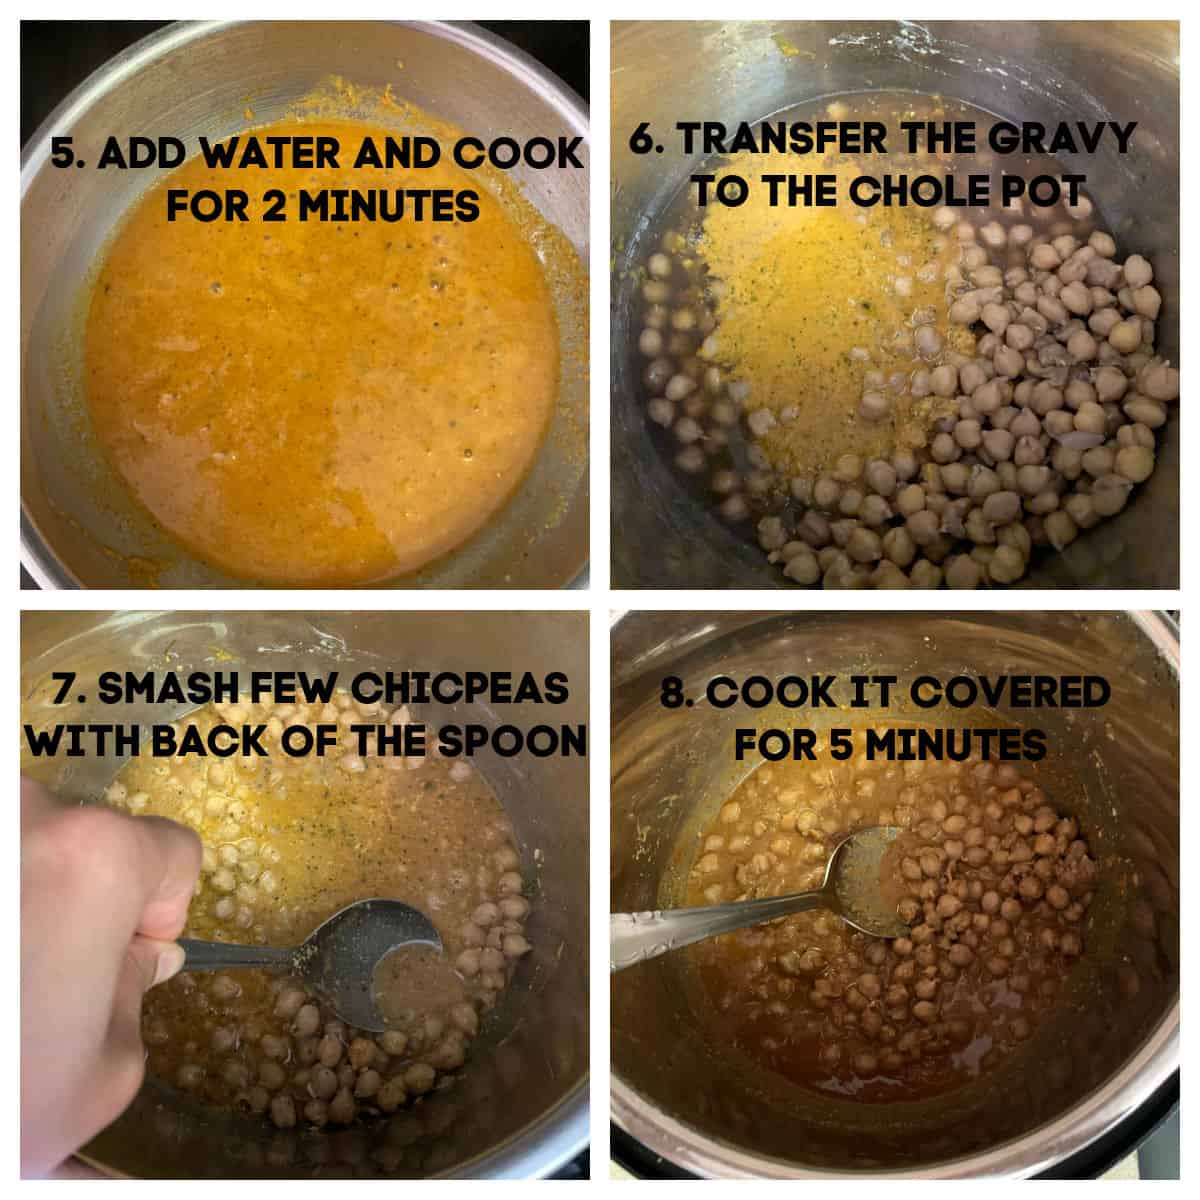 Step by step making of chole in an Instant Pot